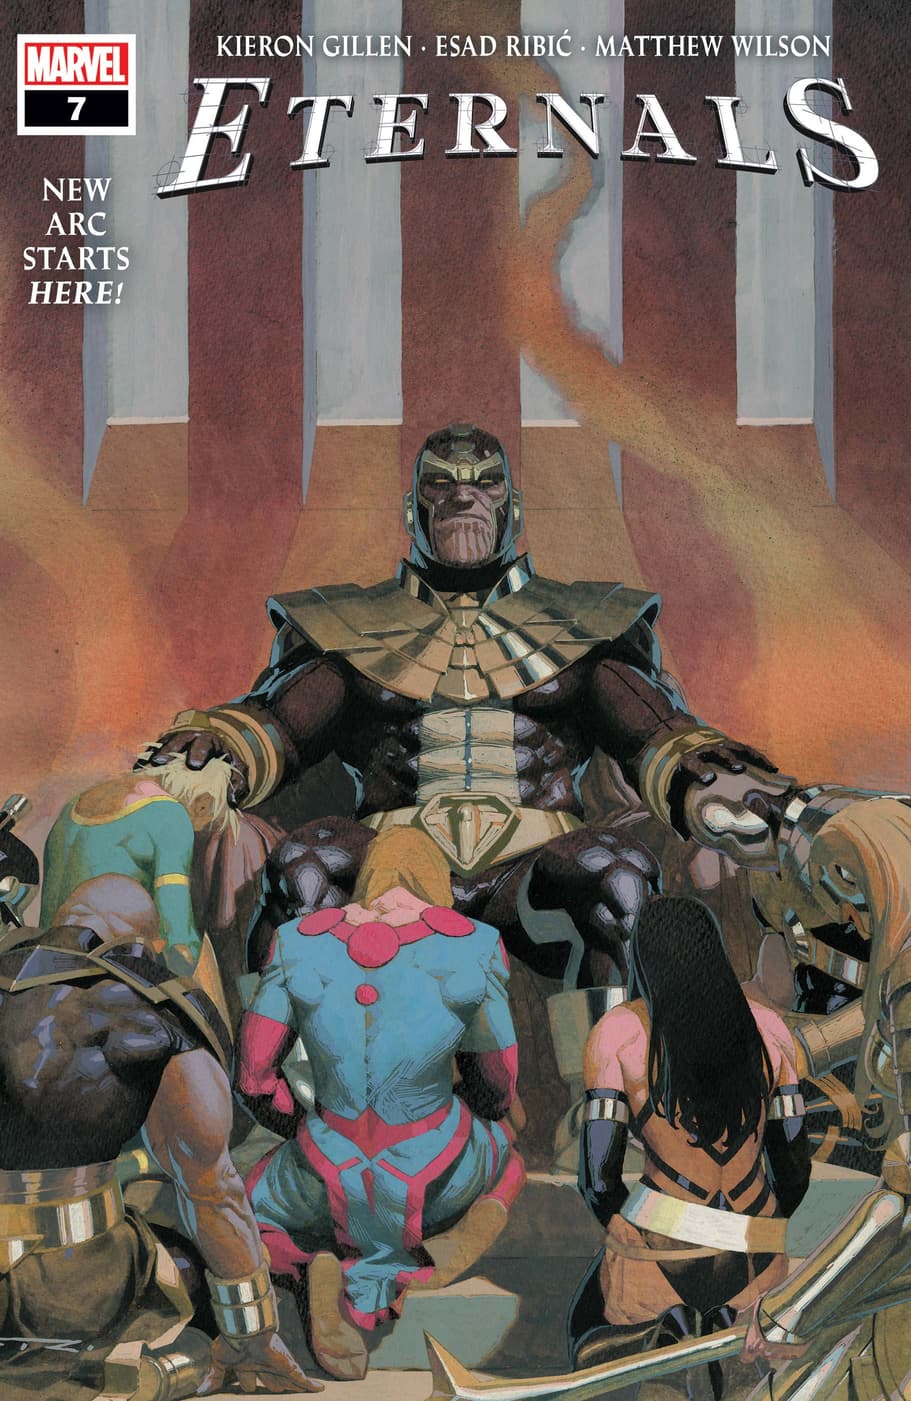 ETERNALS #7 cover by Esad Ribic